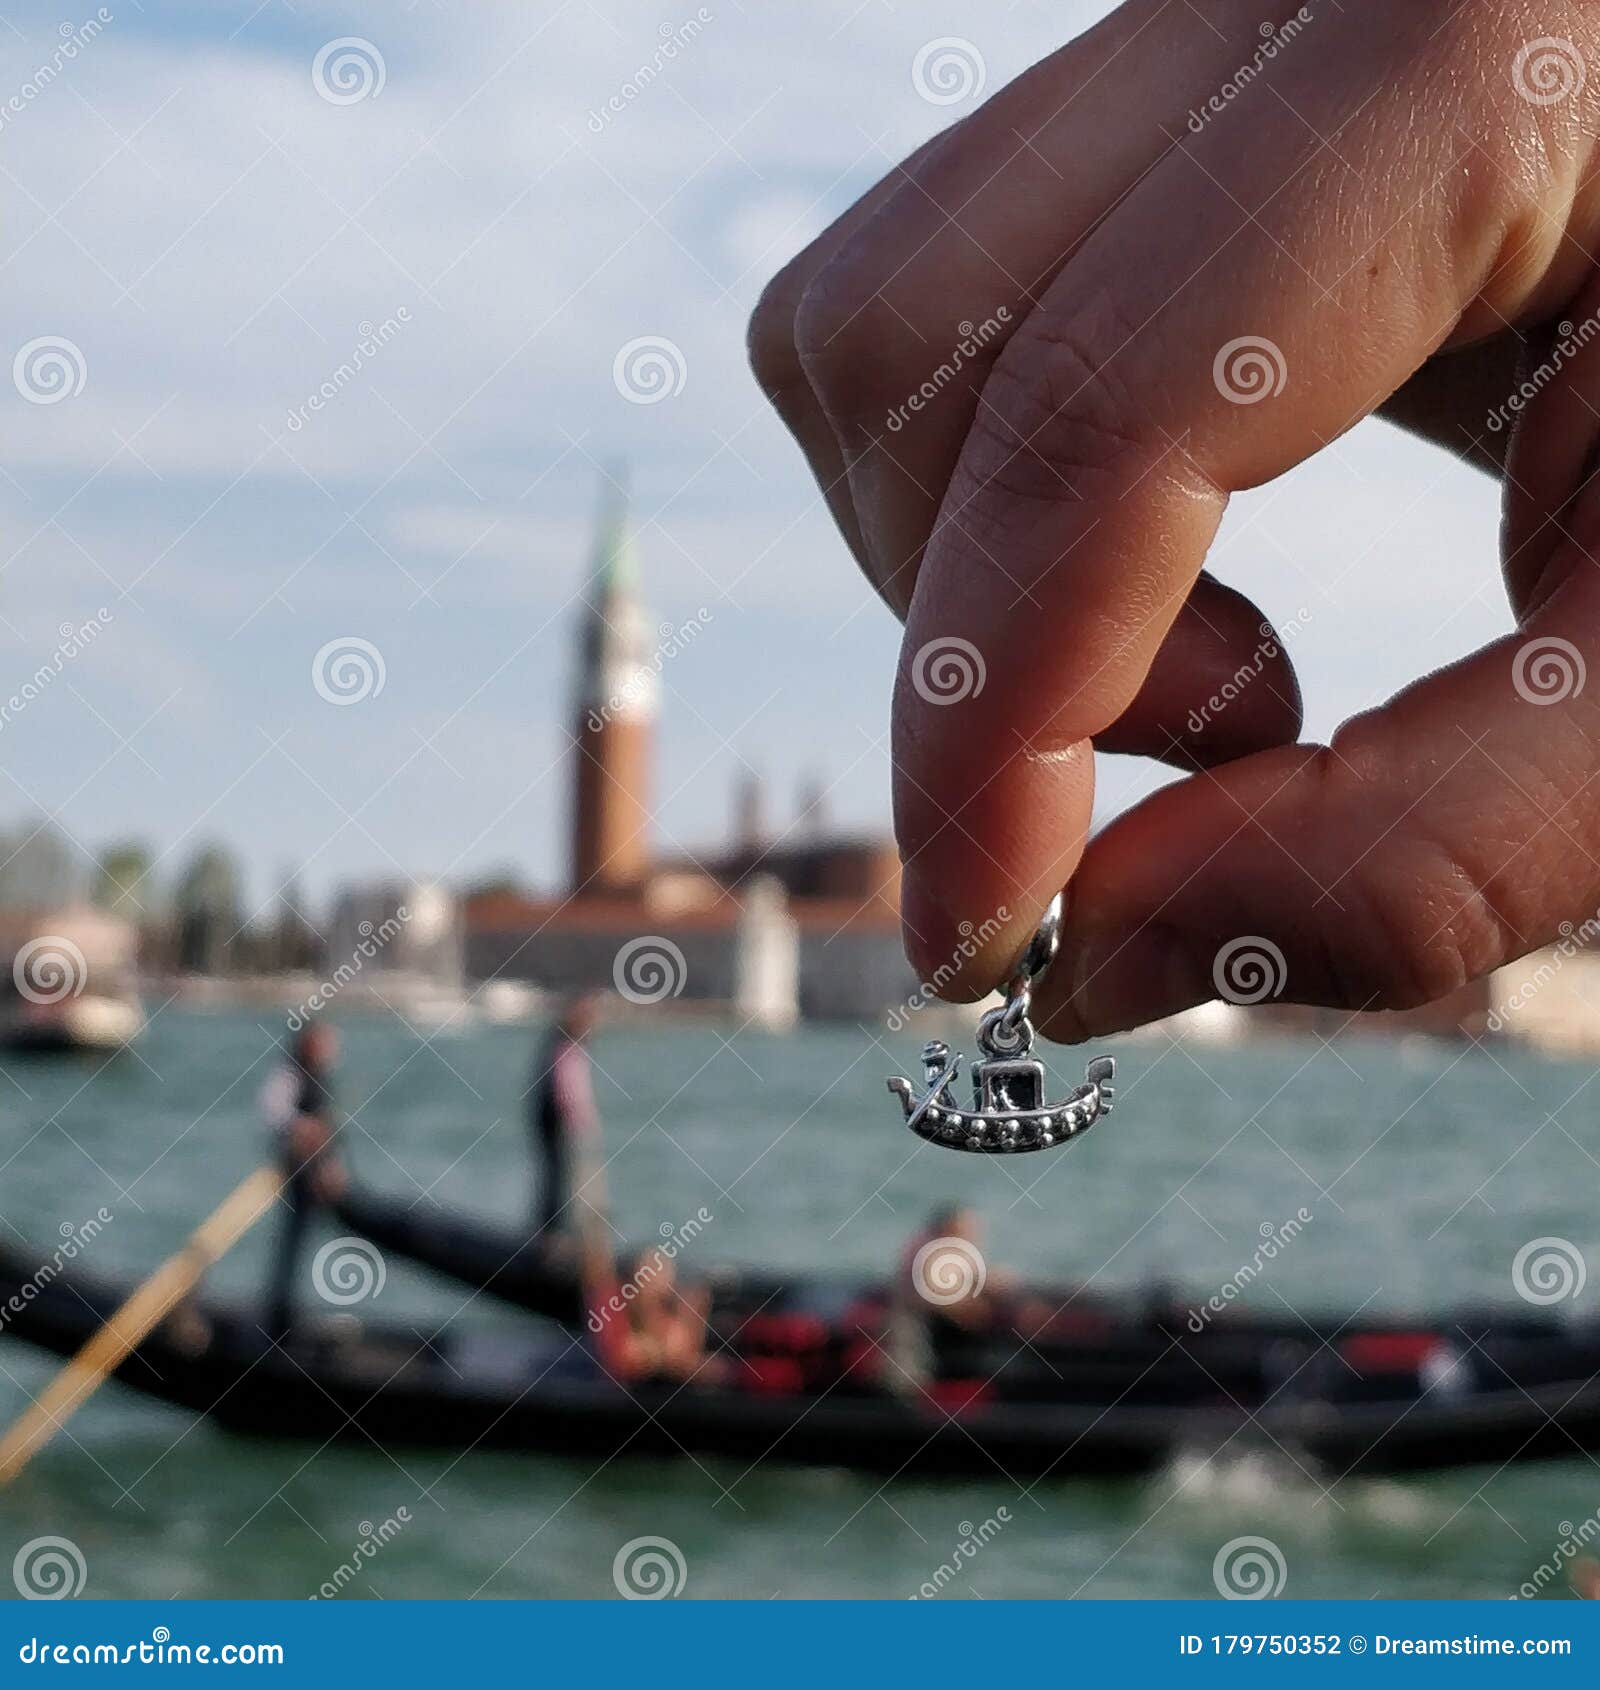 pandora jewerly in the great canal of venice